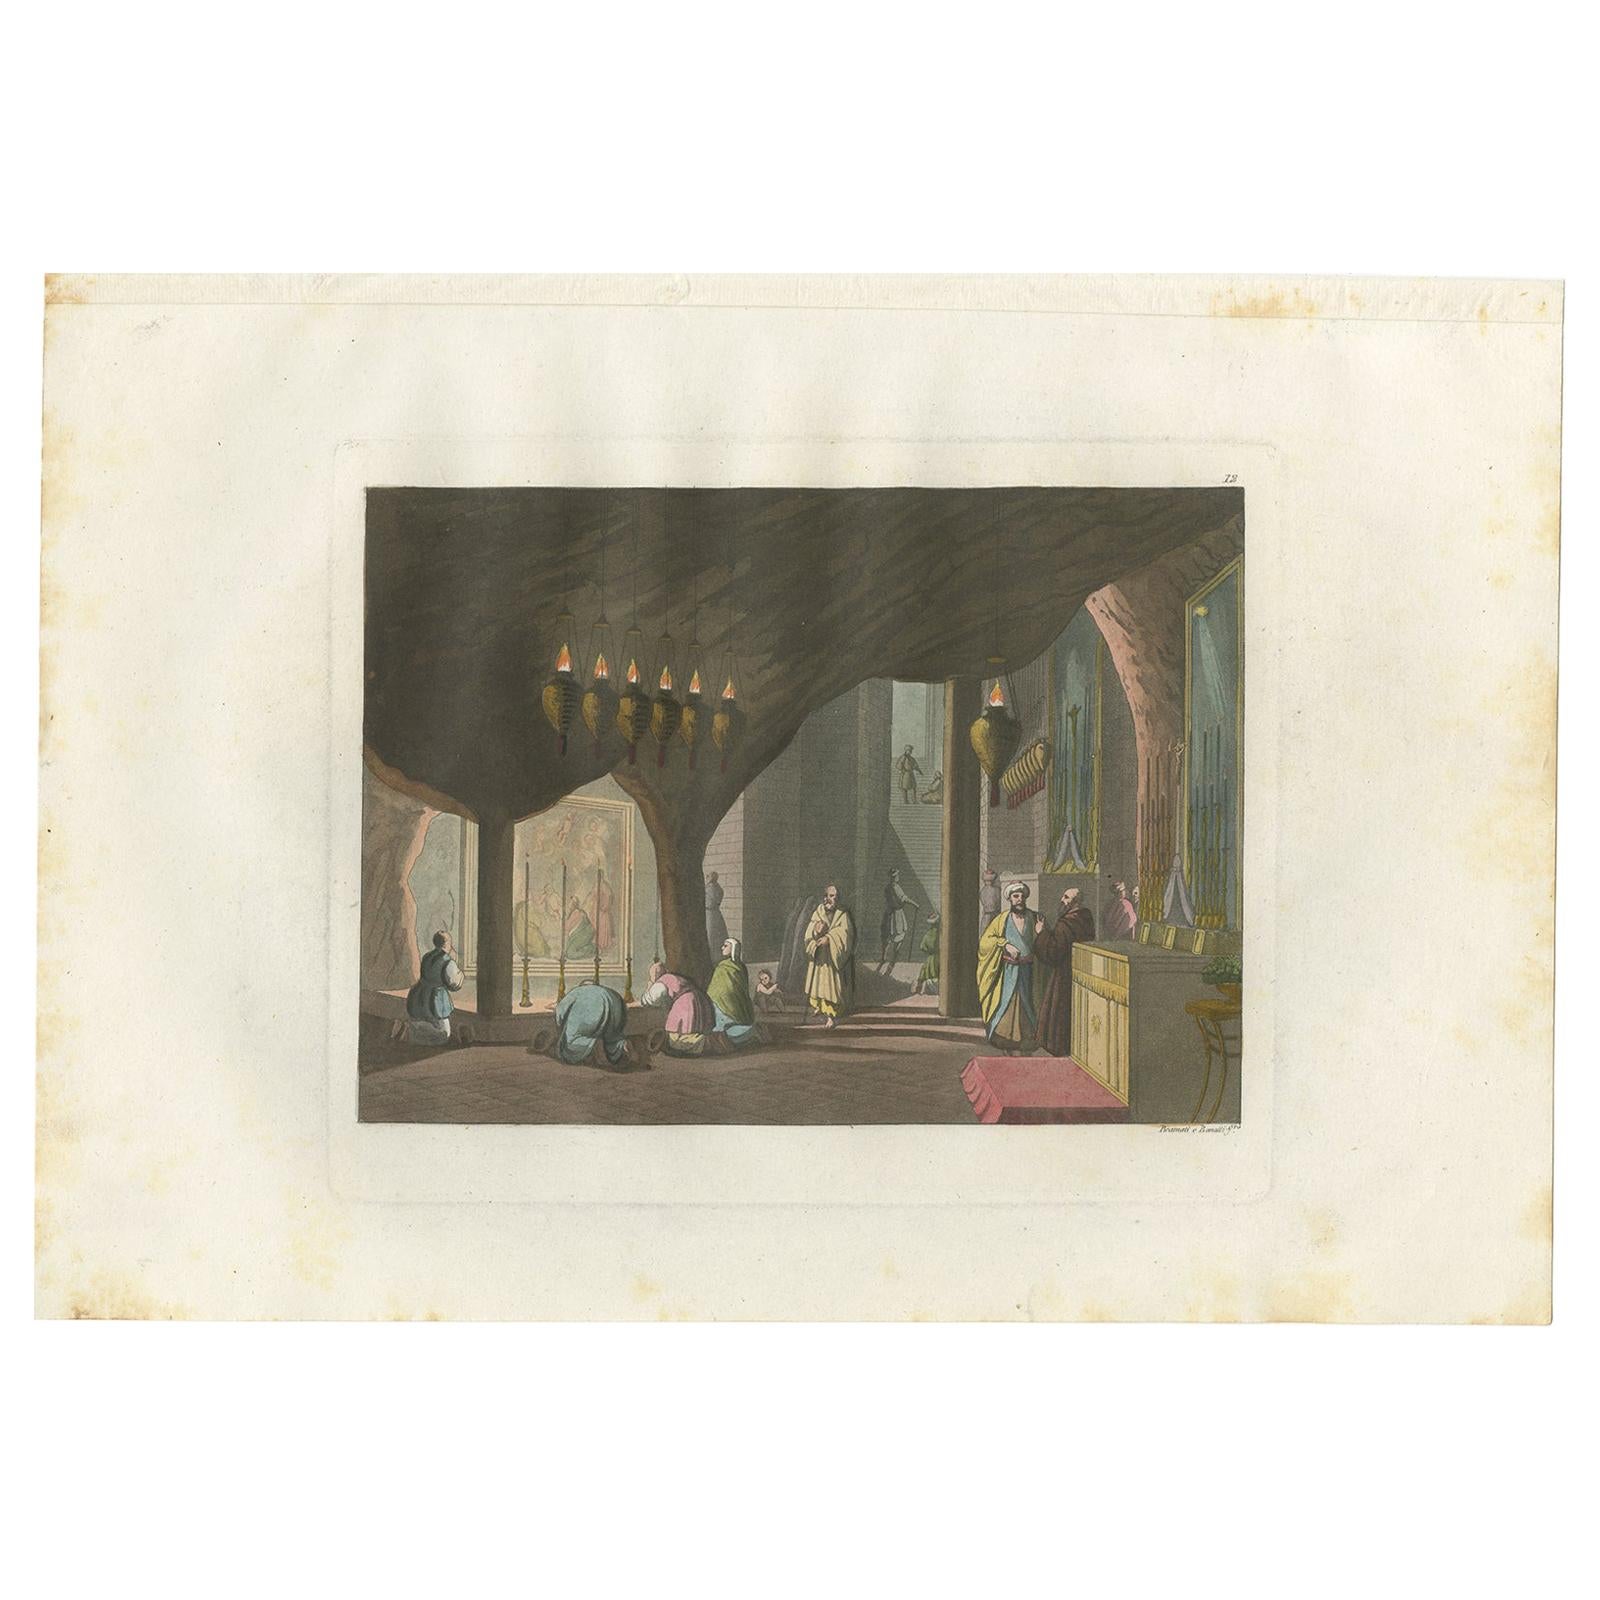 Antique Print of the Nativity Grotto by Ferrario '1831'